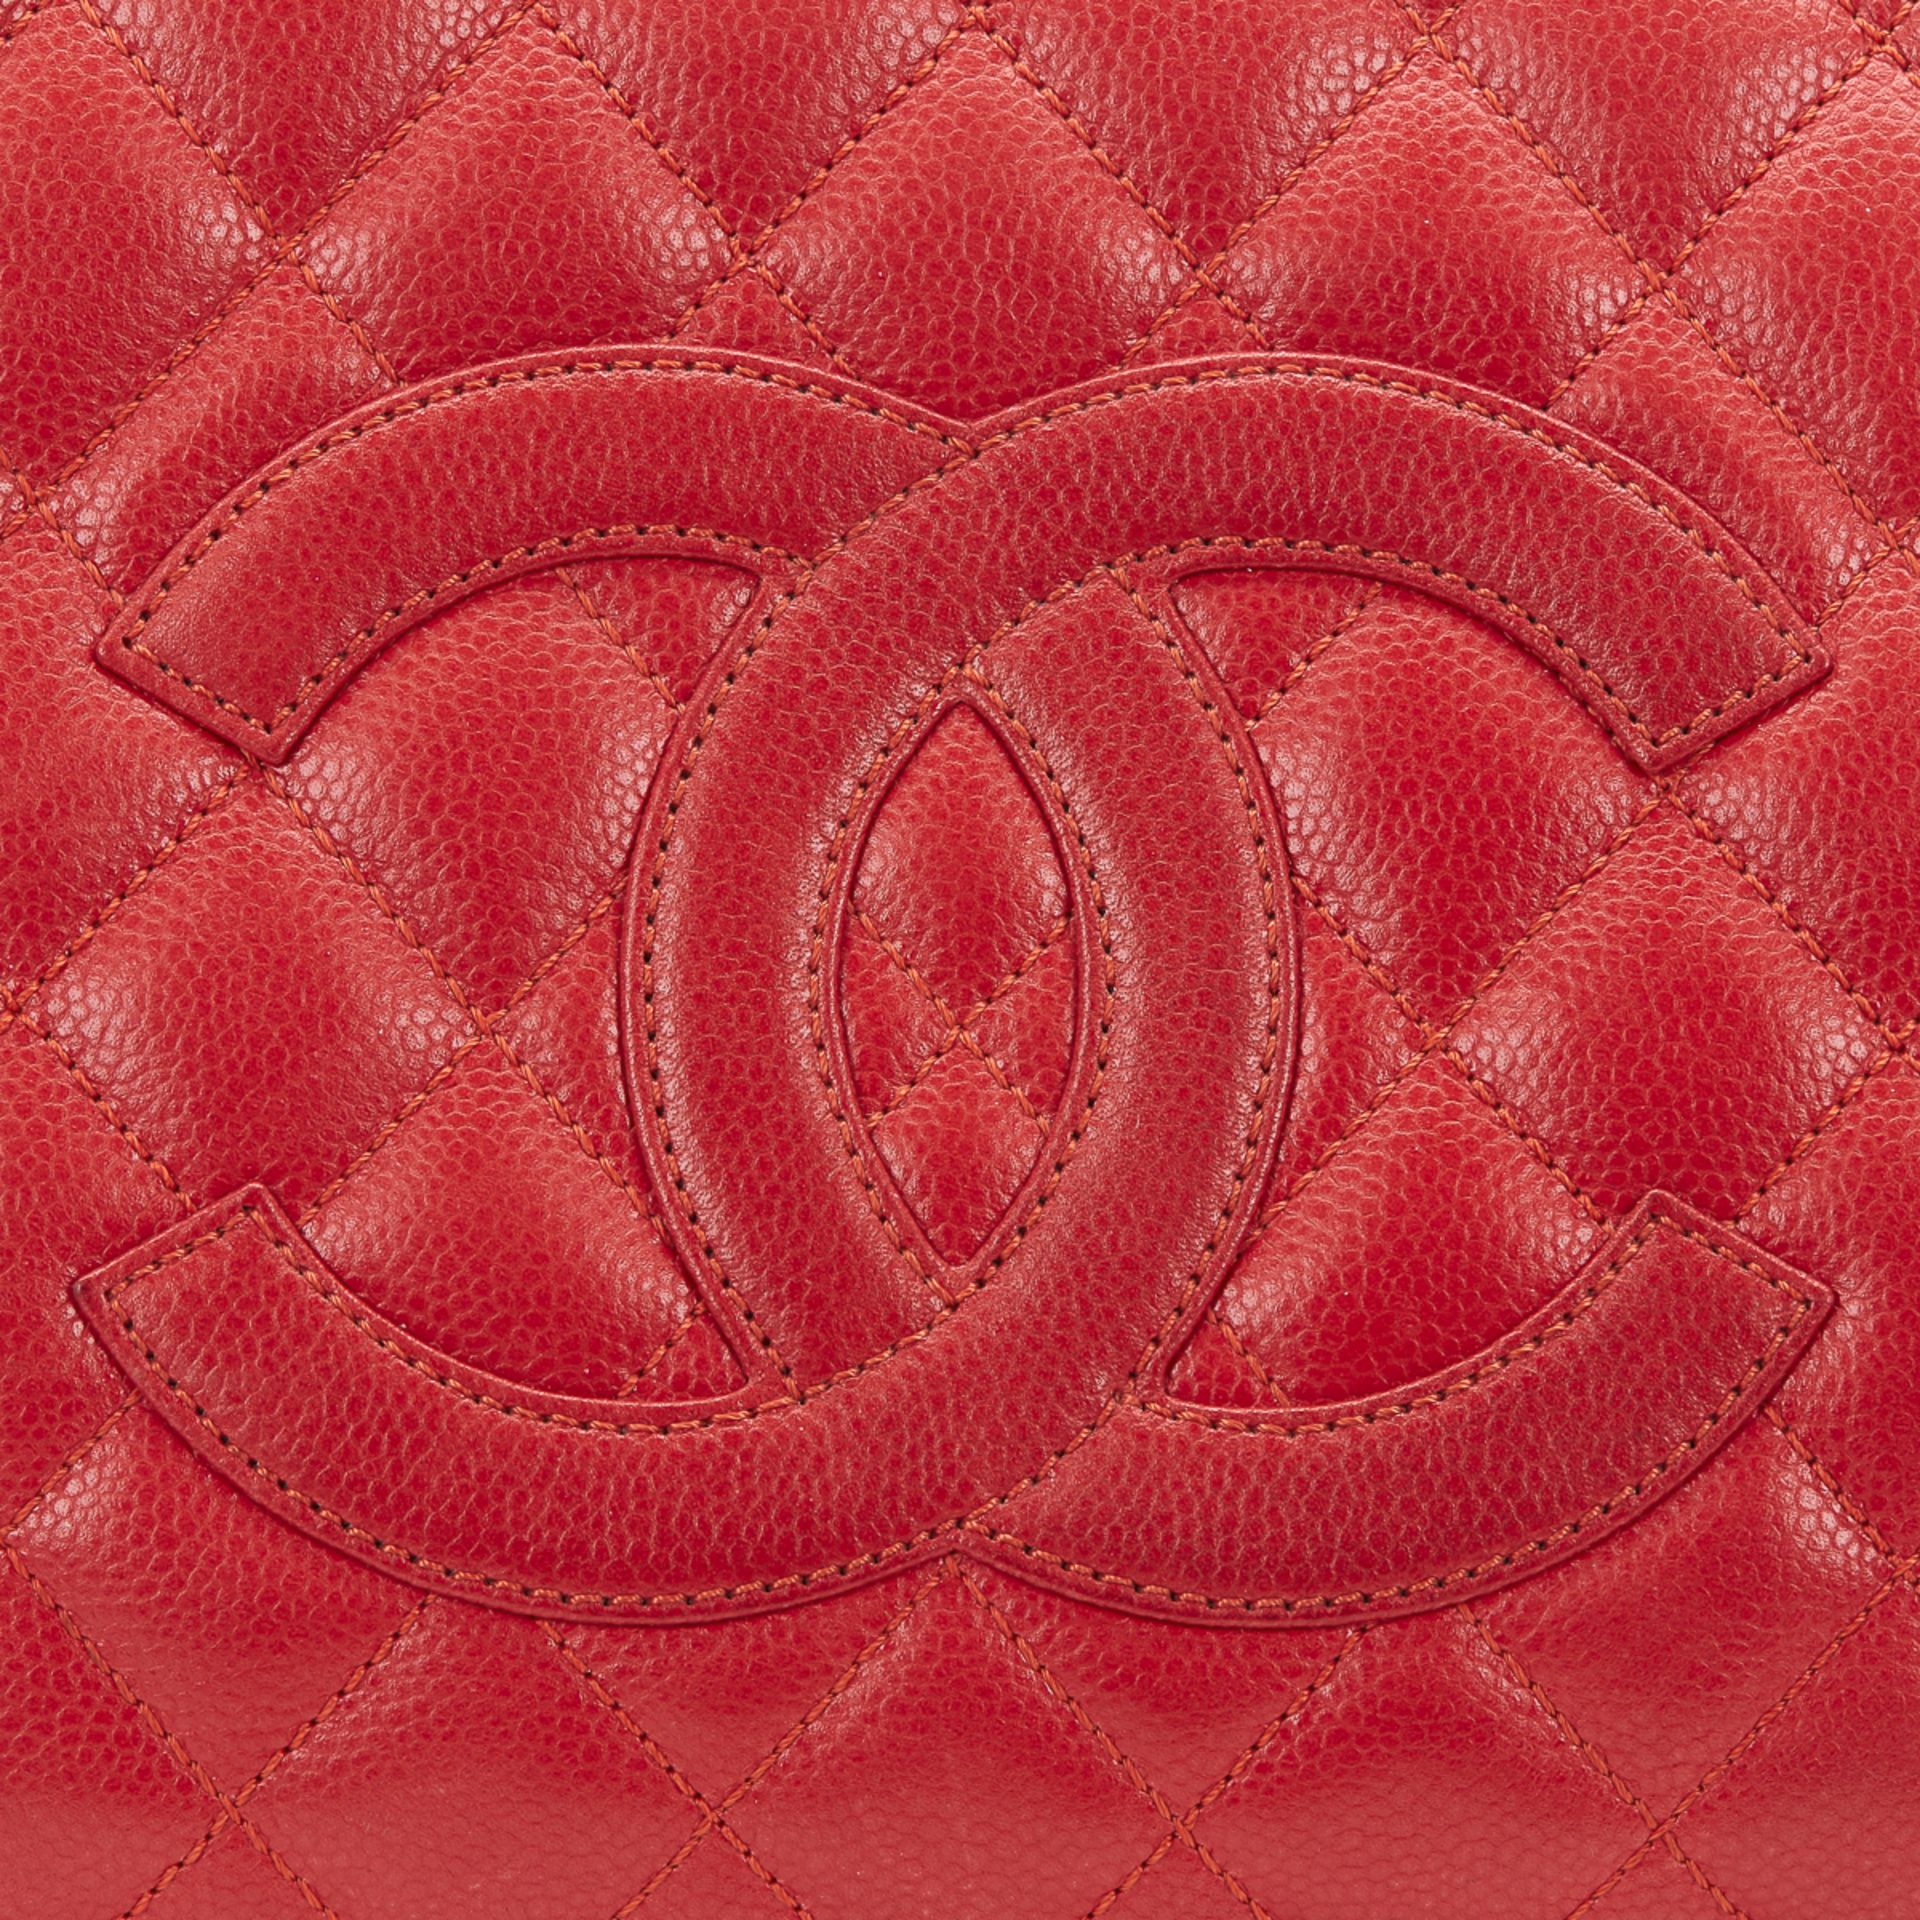 CHANEL Grand Shopping Tote - Image 5 of 10